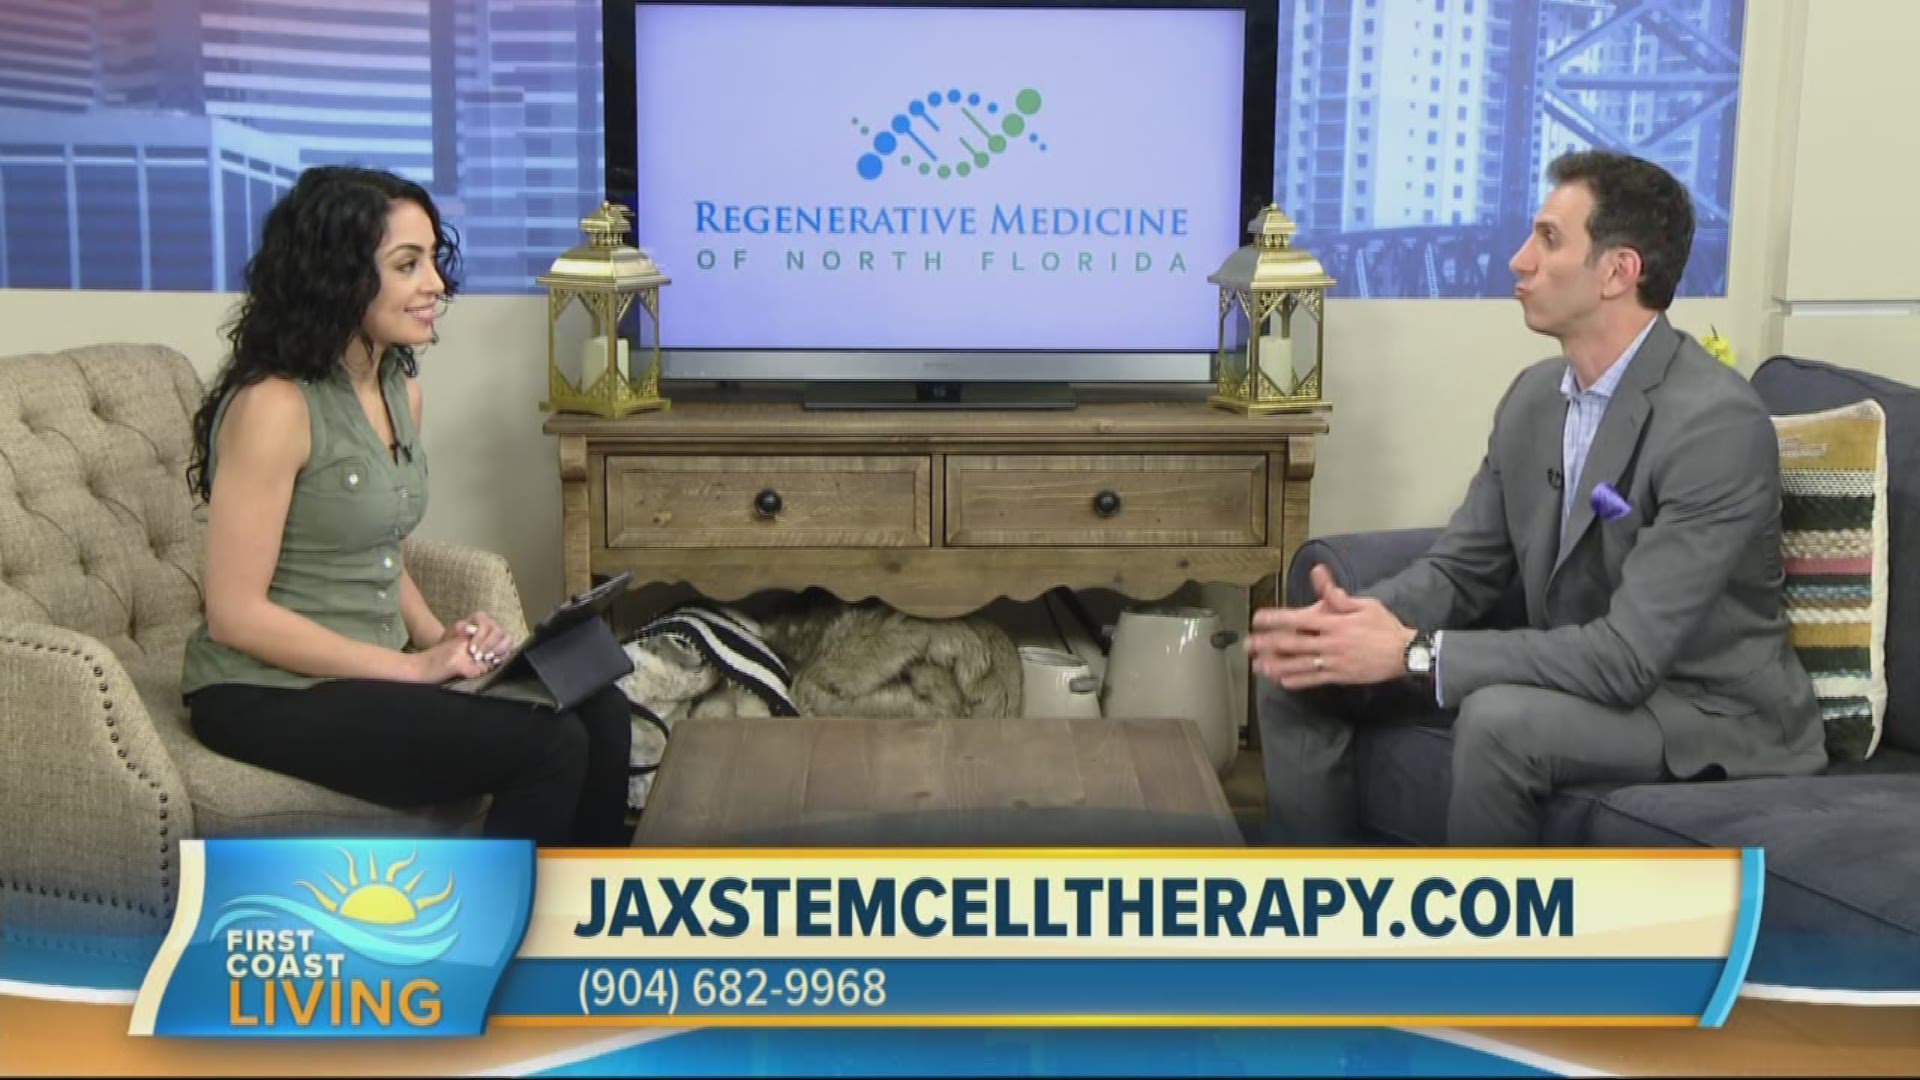 Learn more to see if stem cell therapy is for you!